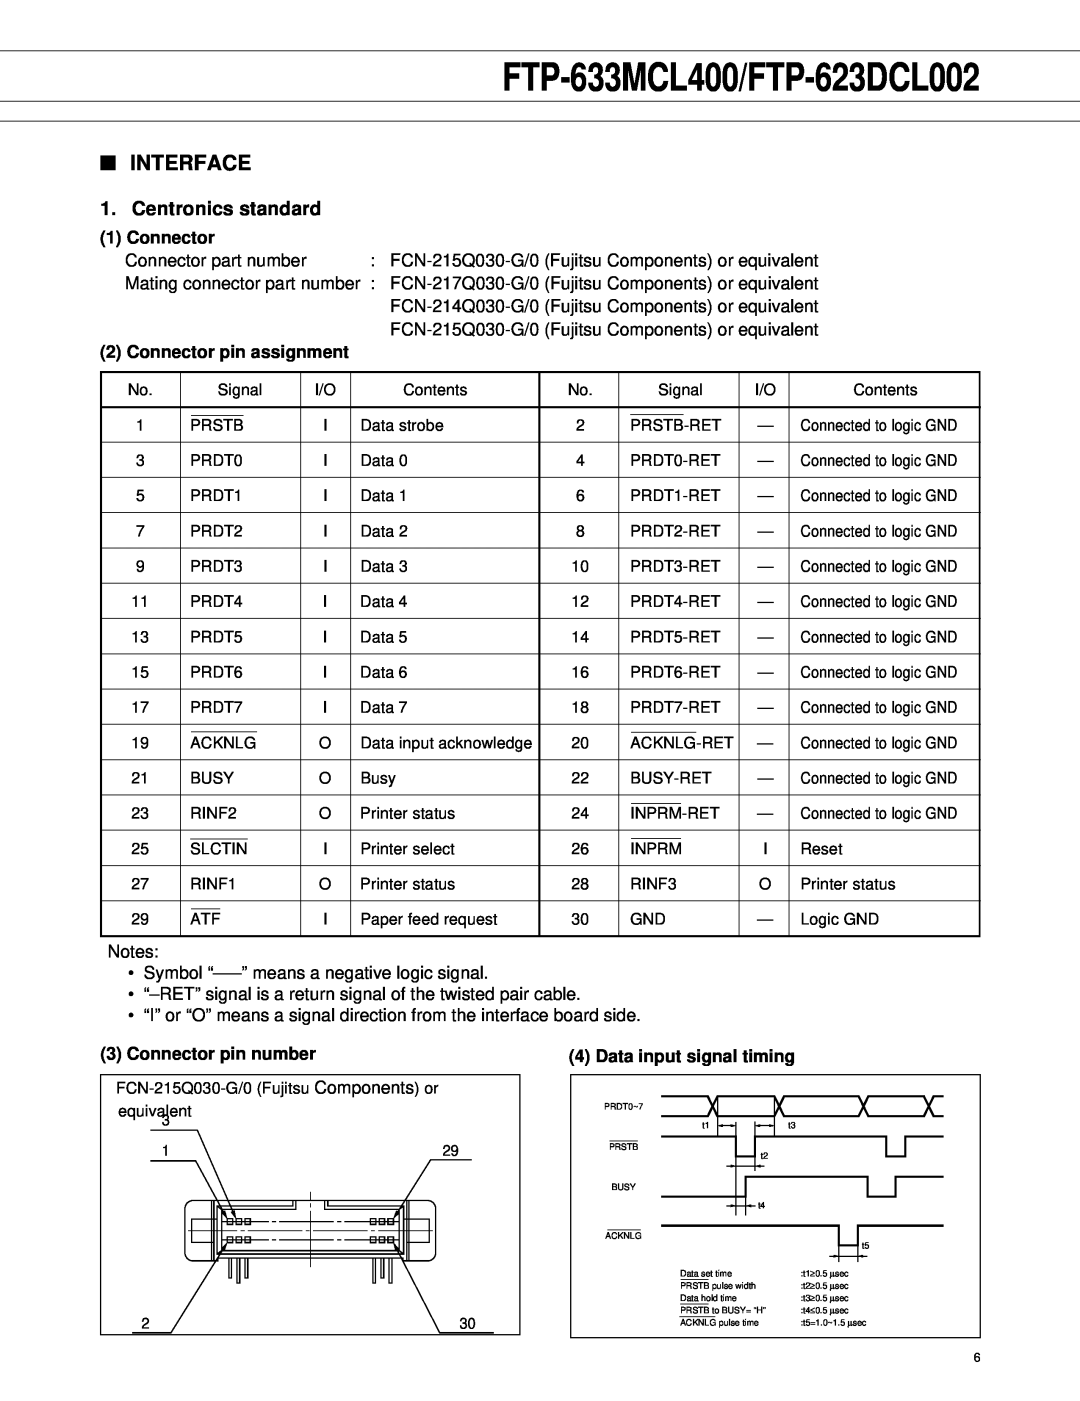 Fujitsu FTP-633MCL400 manual Interface, Centronics standard, Connector pin assignment, Connector pin number 